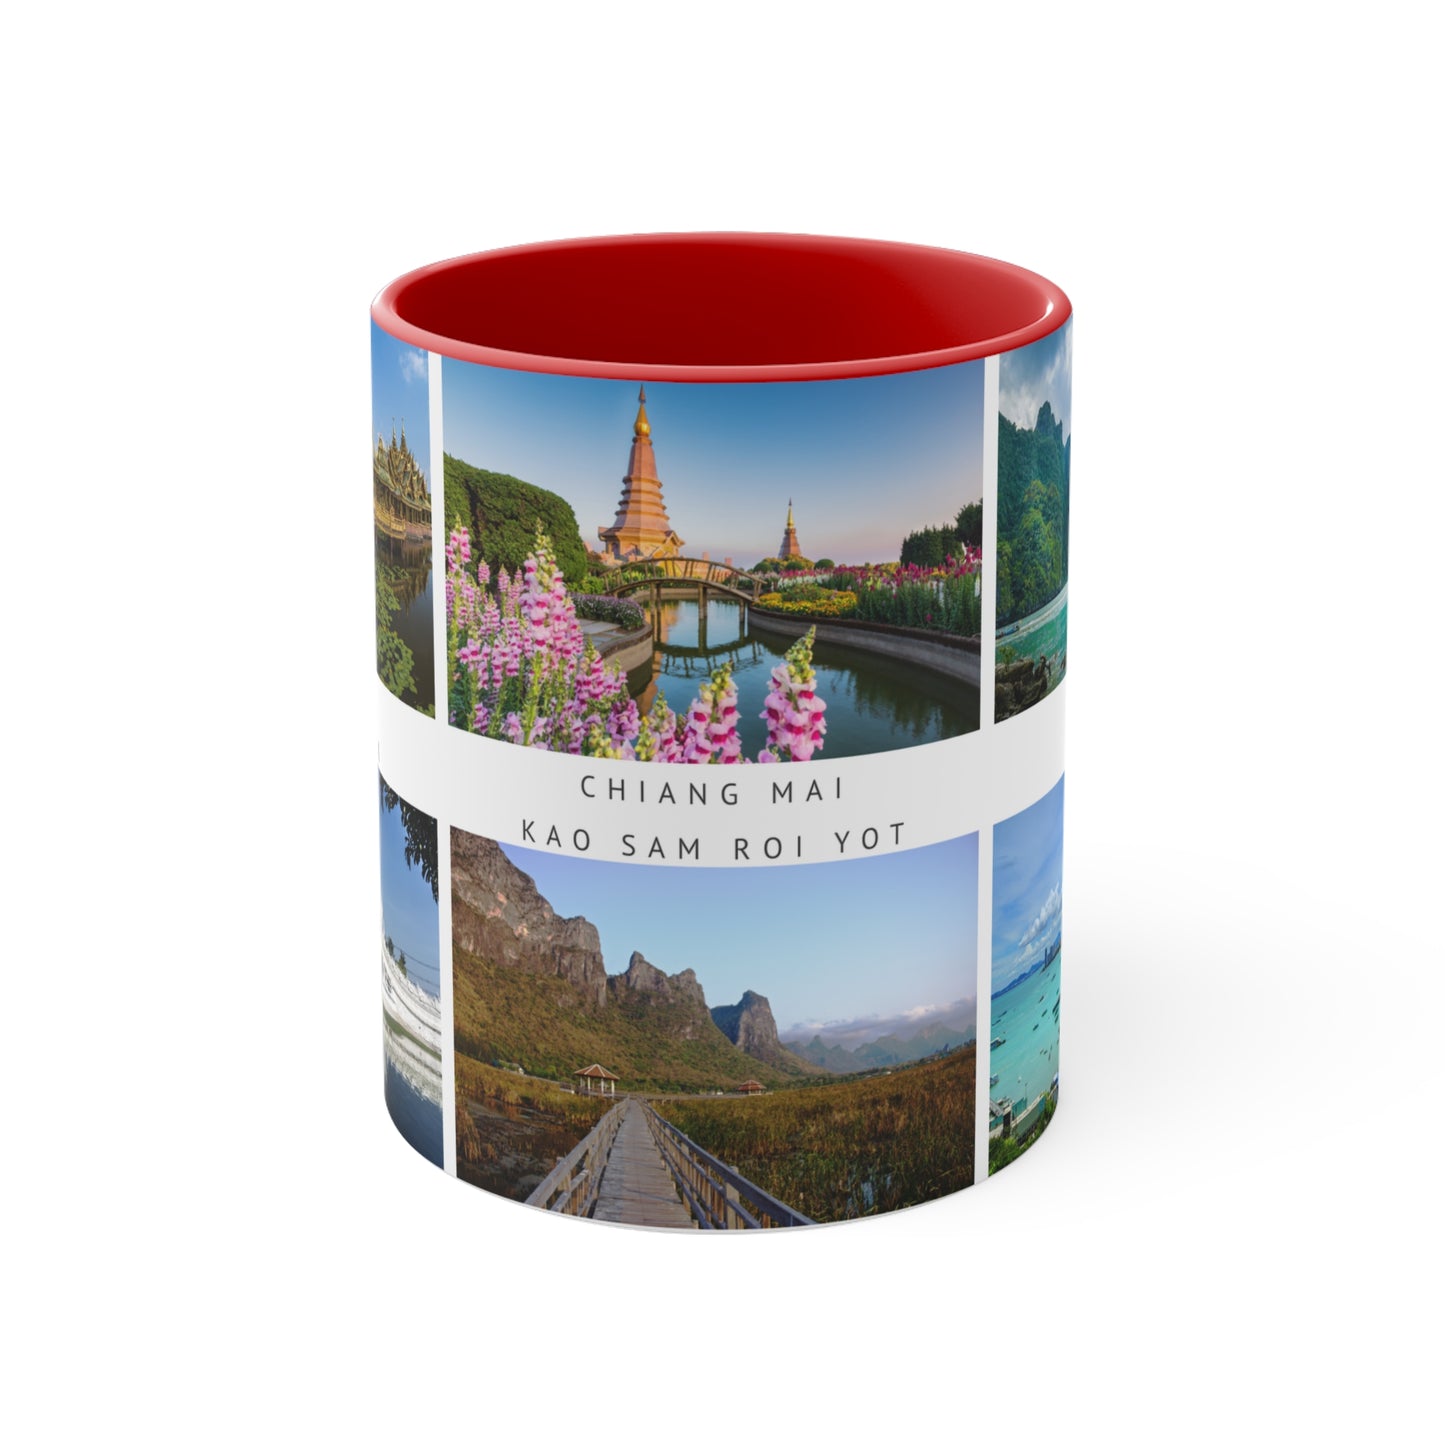 Amazing Thailand offers delicious cuisine, culture, beaches, festivals and the beautiful people calling it home. This Travel Accent Coffee Mug is a part of a Travel Series for you to choose from. 11oz. Great as a gift or get one to enjoy yourself.